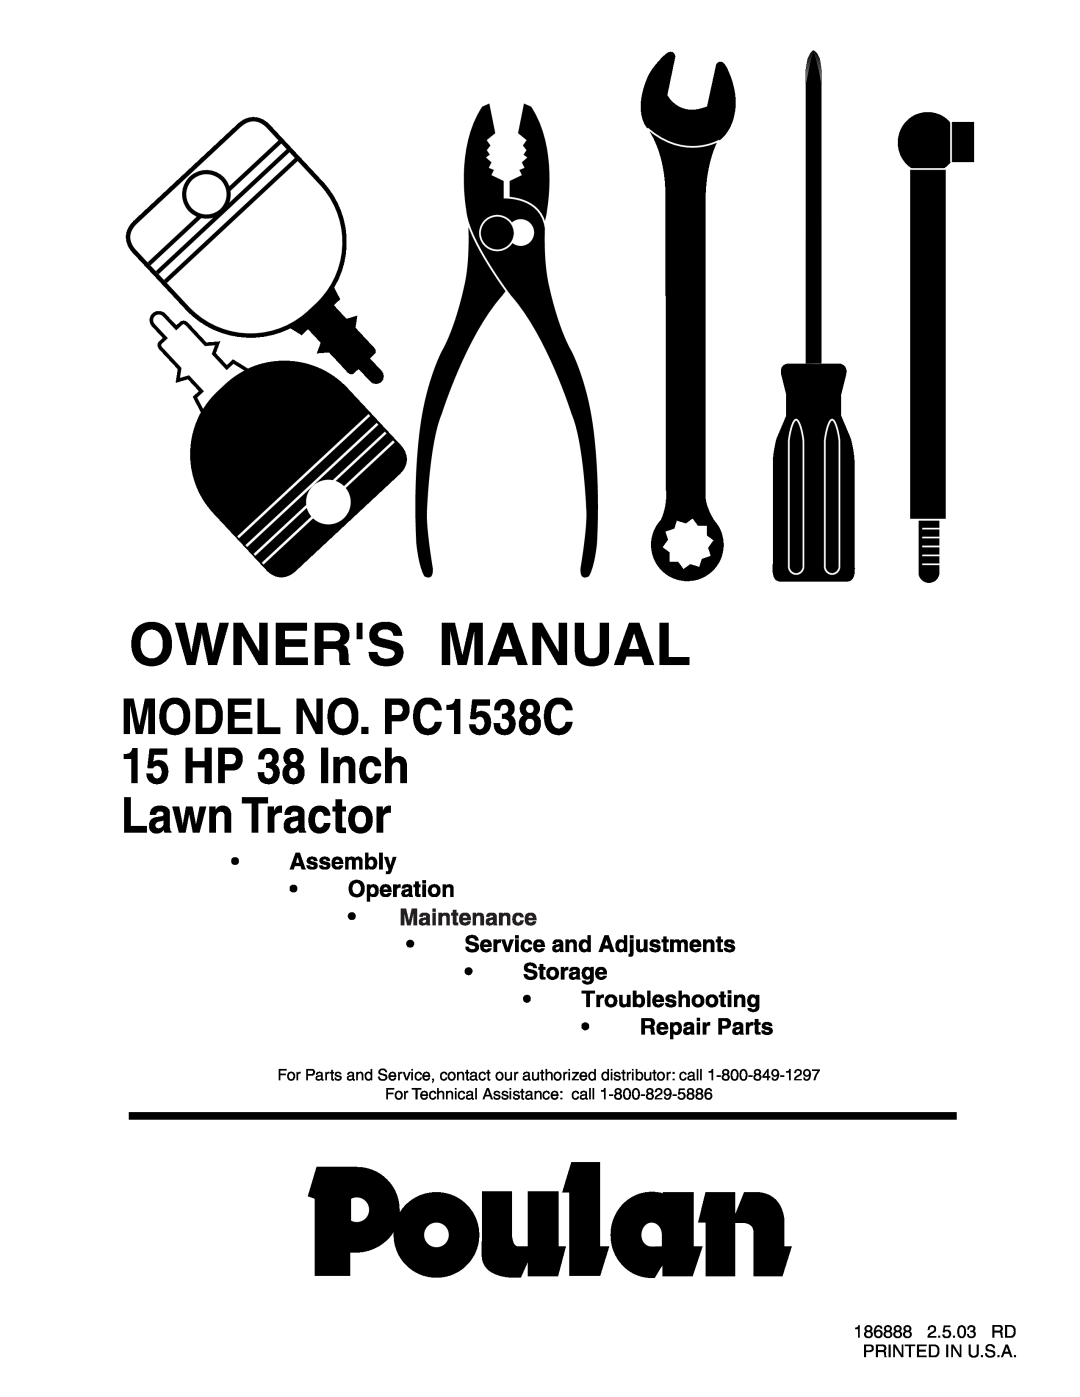 Poulan 186888, 954570932 manual MODEL NO. PC1538C 15 HP 38 Inch Lawn Tractor 